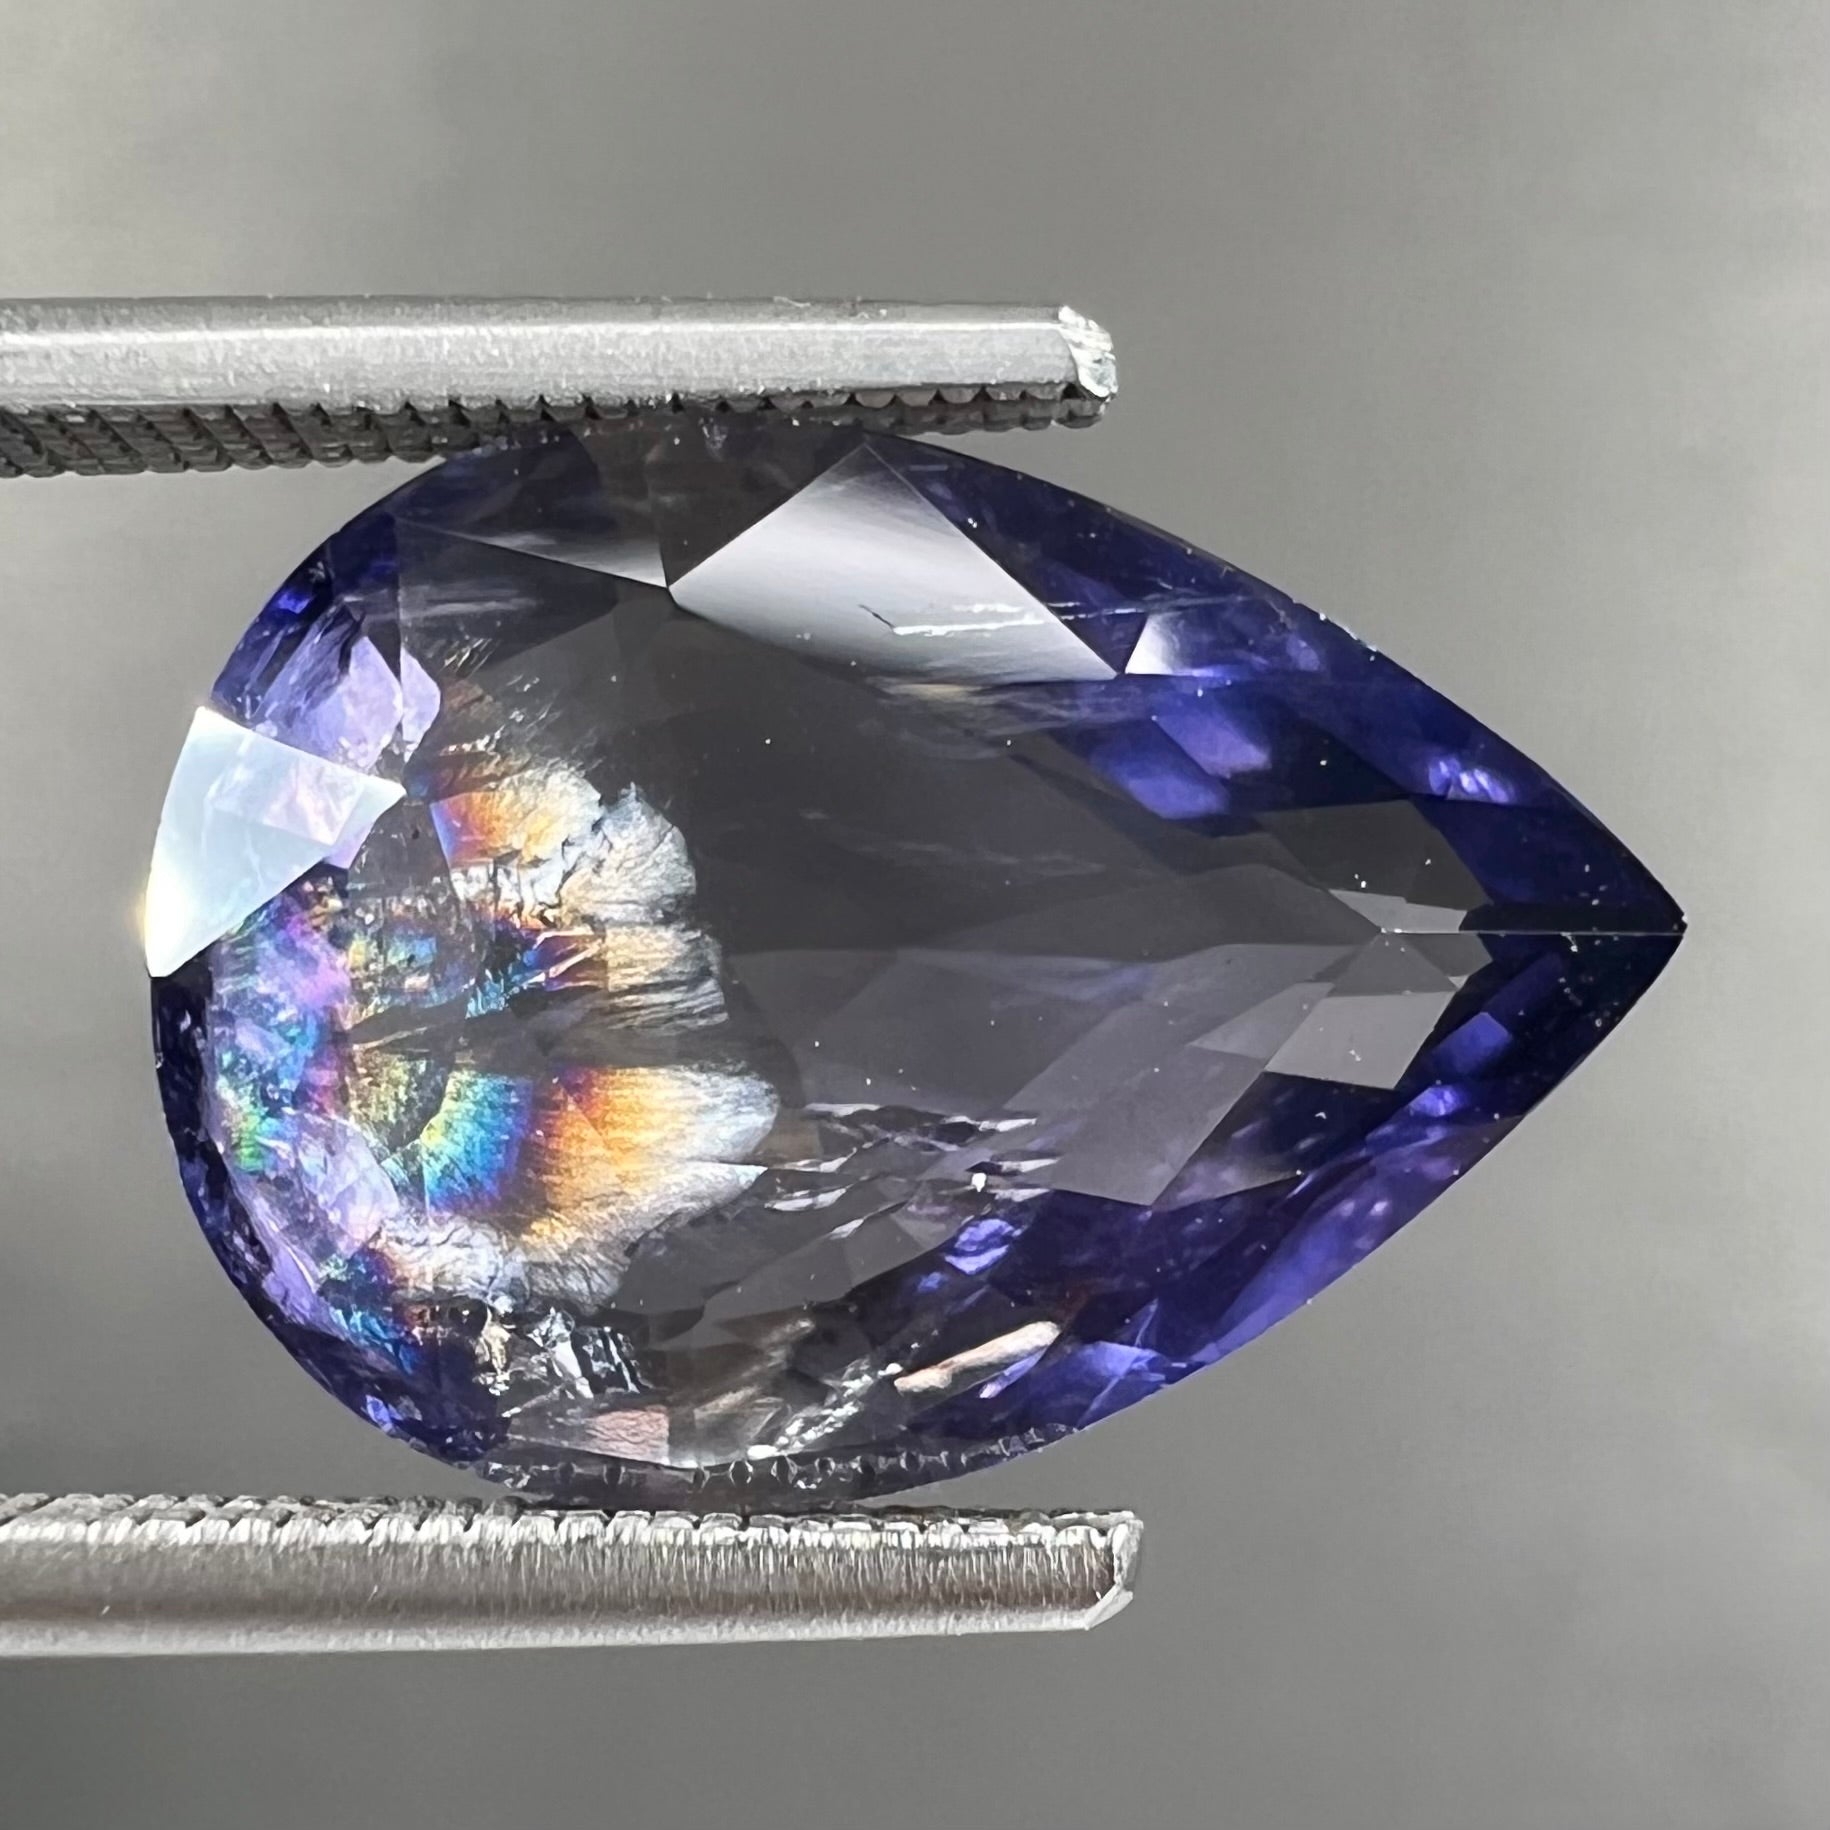 A loose, pear shaped bicolor iolite gemstone.  The stone shows violite purple and silver colors.